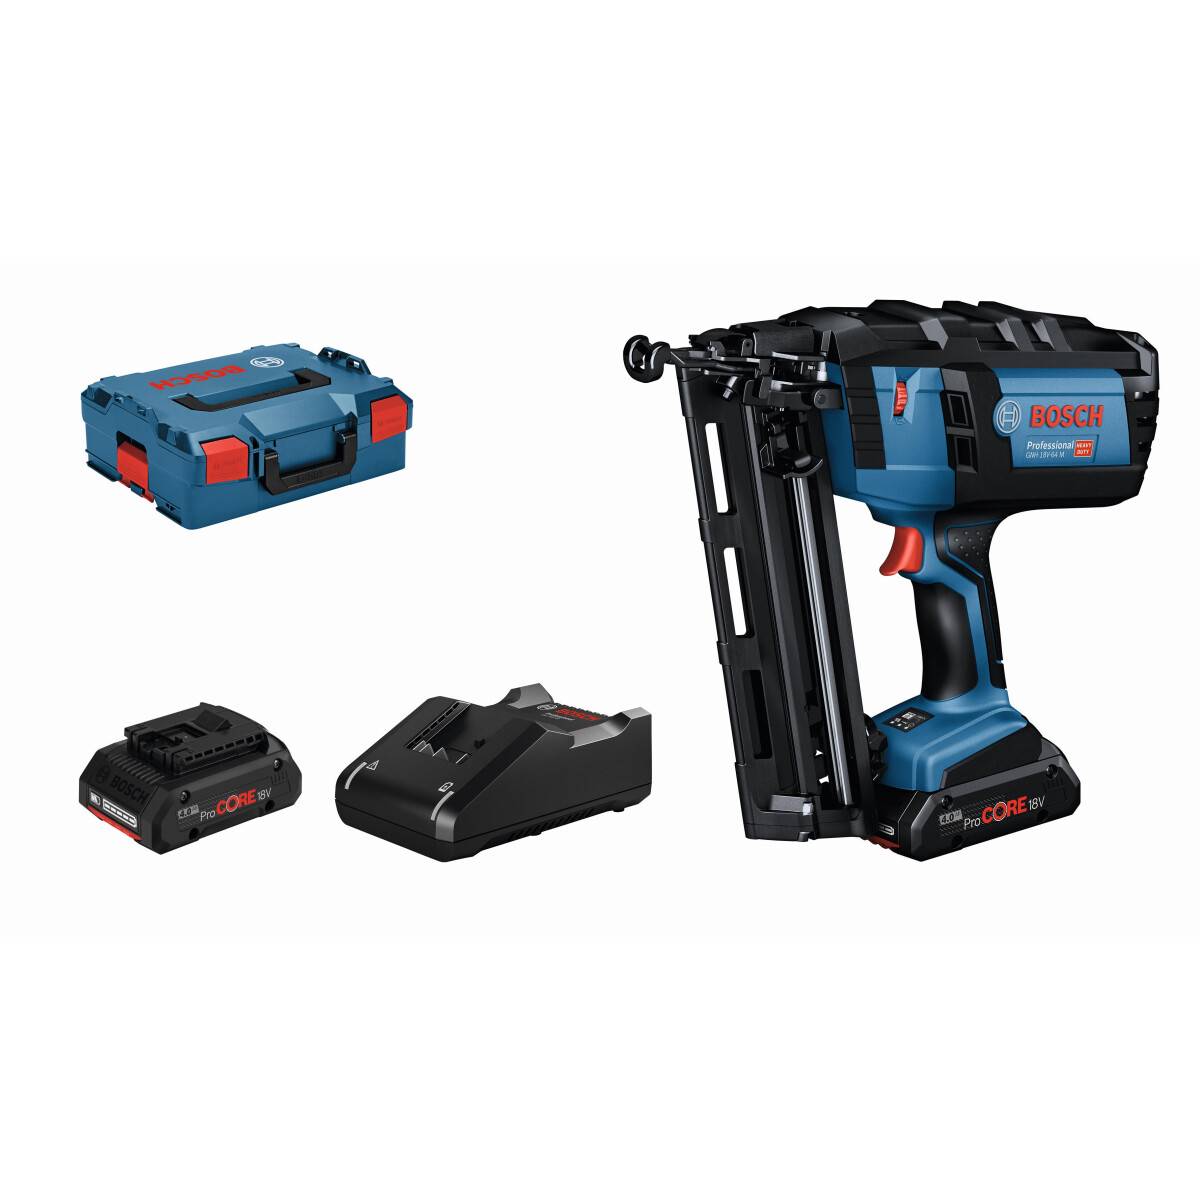 Bosch Home & Garden 18V Cordless Electric Tacker Stapler Nailer Without  Battery, Includes 1000 Staples, Woodworking, DIY (UniversalTacker 18V-14) :  Amazon.com.au: Home